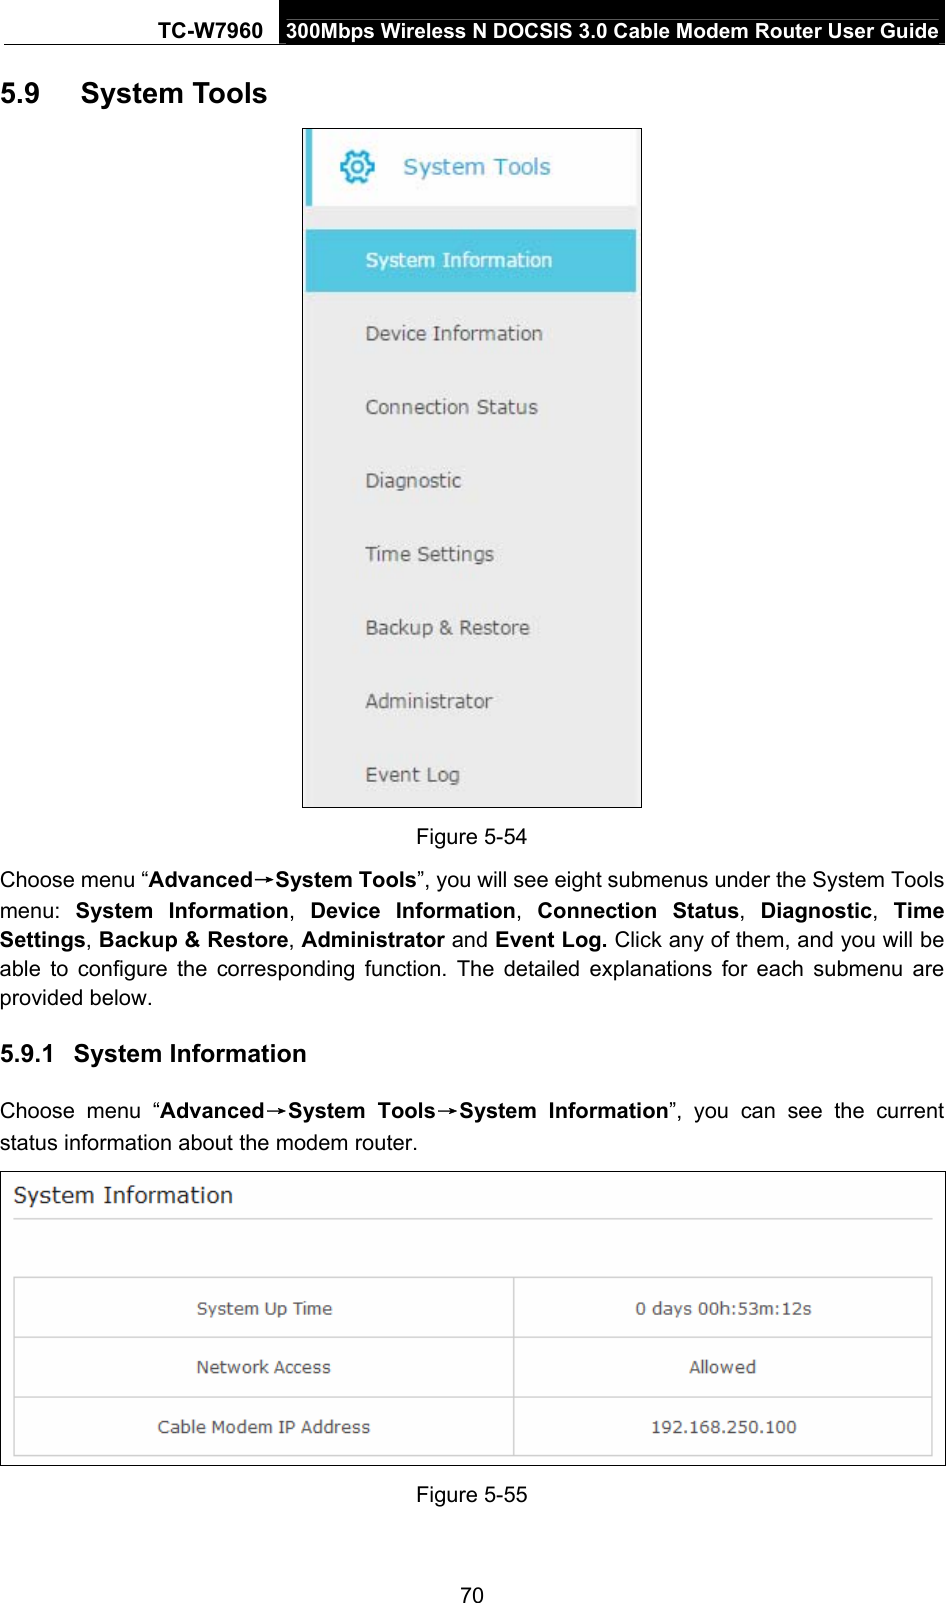 TC-W7960  300Mbps Wireless N DOCSIS 3.0 Cable Modem Router User Guide 5.9  System Tools  Figure 5-54 Choose menu “Advanced→System Tools”, you will see eight submenus under the System Tools menu:  System Information,  Device Information,  Connection Status,  Diagnostic,  Time Settings, Backup &amp; Restore, Administrator and Event Log. Click any of them, and you will be able to configure the corresponding function. The detailed explanations for each submenu are provided below. 5.9.1  System Information Choose menu “Advanced→System Tools→System Information”, you can see the current status information about the modem router.  Figure 5-55 70 